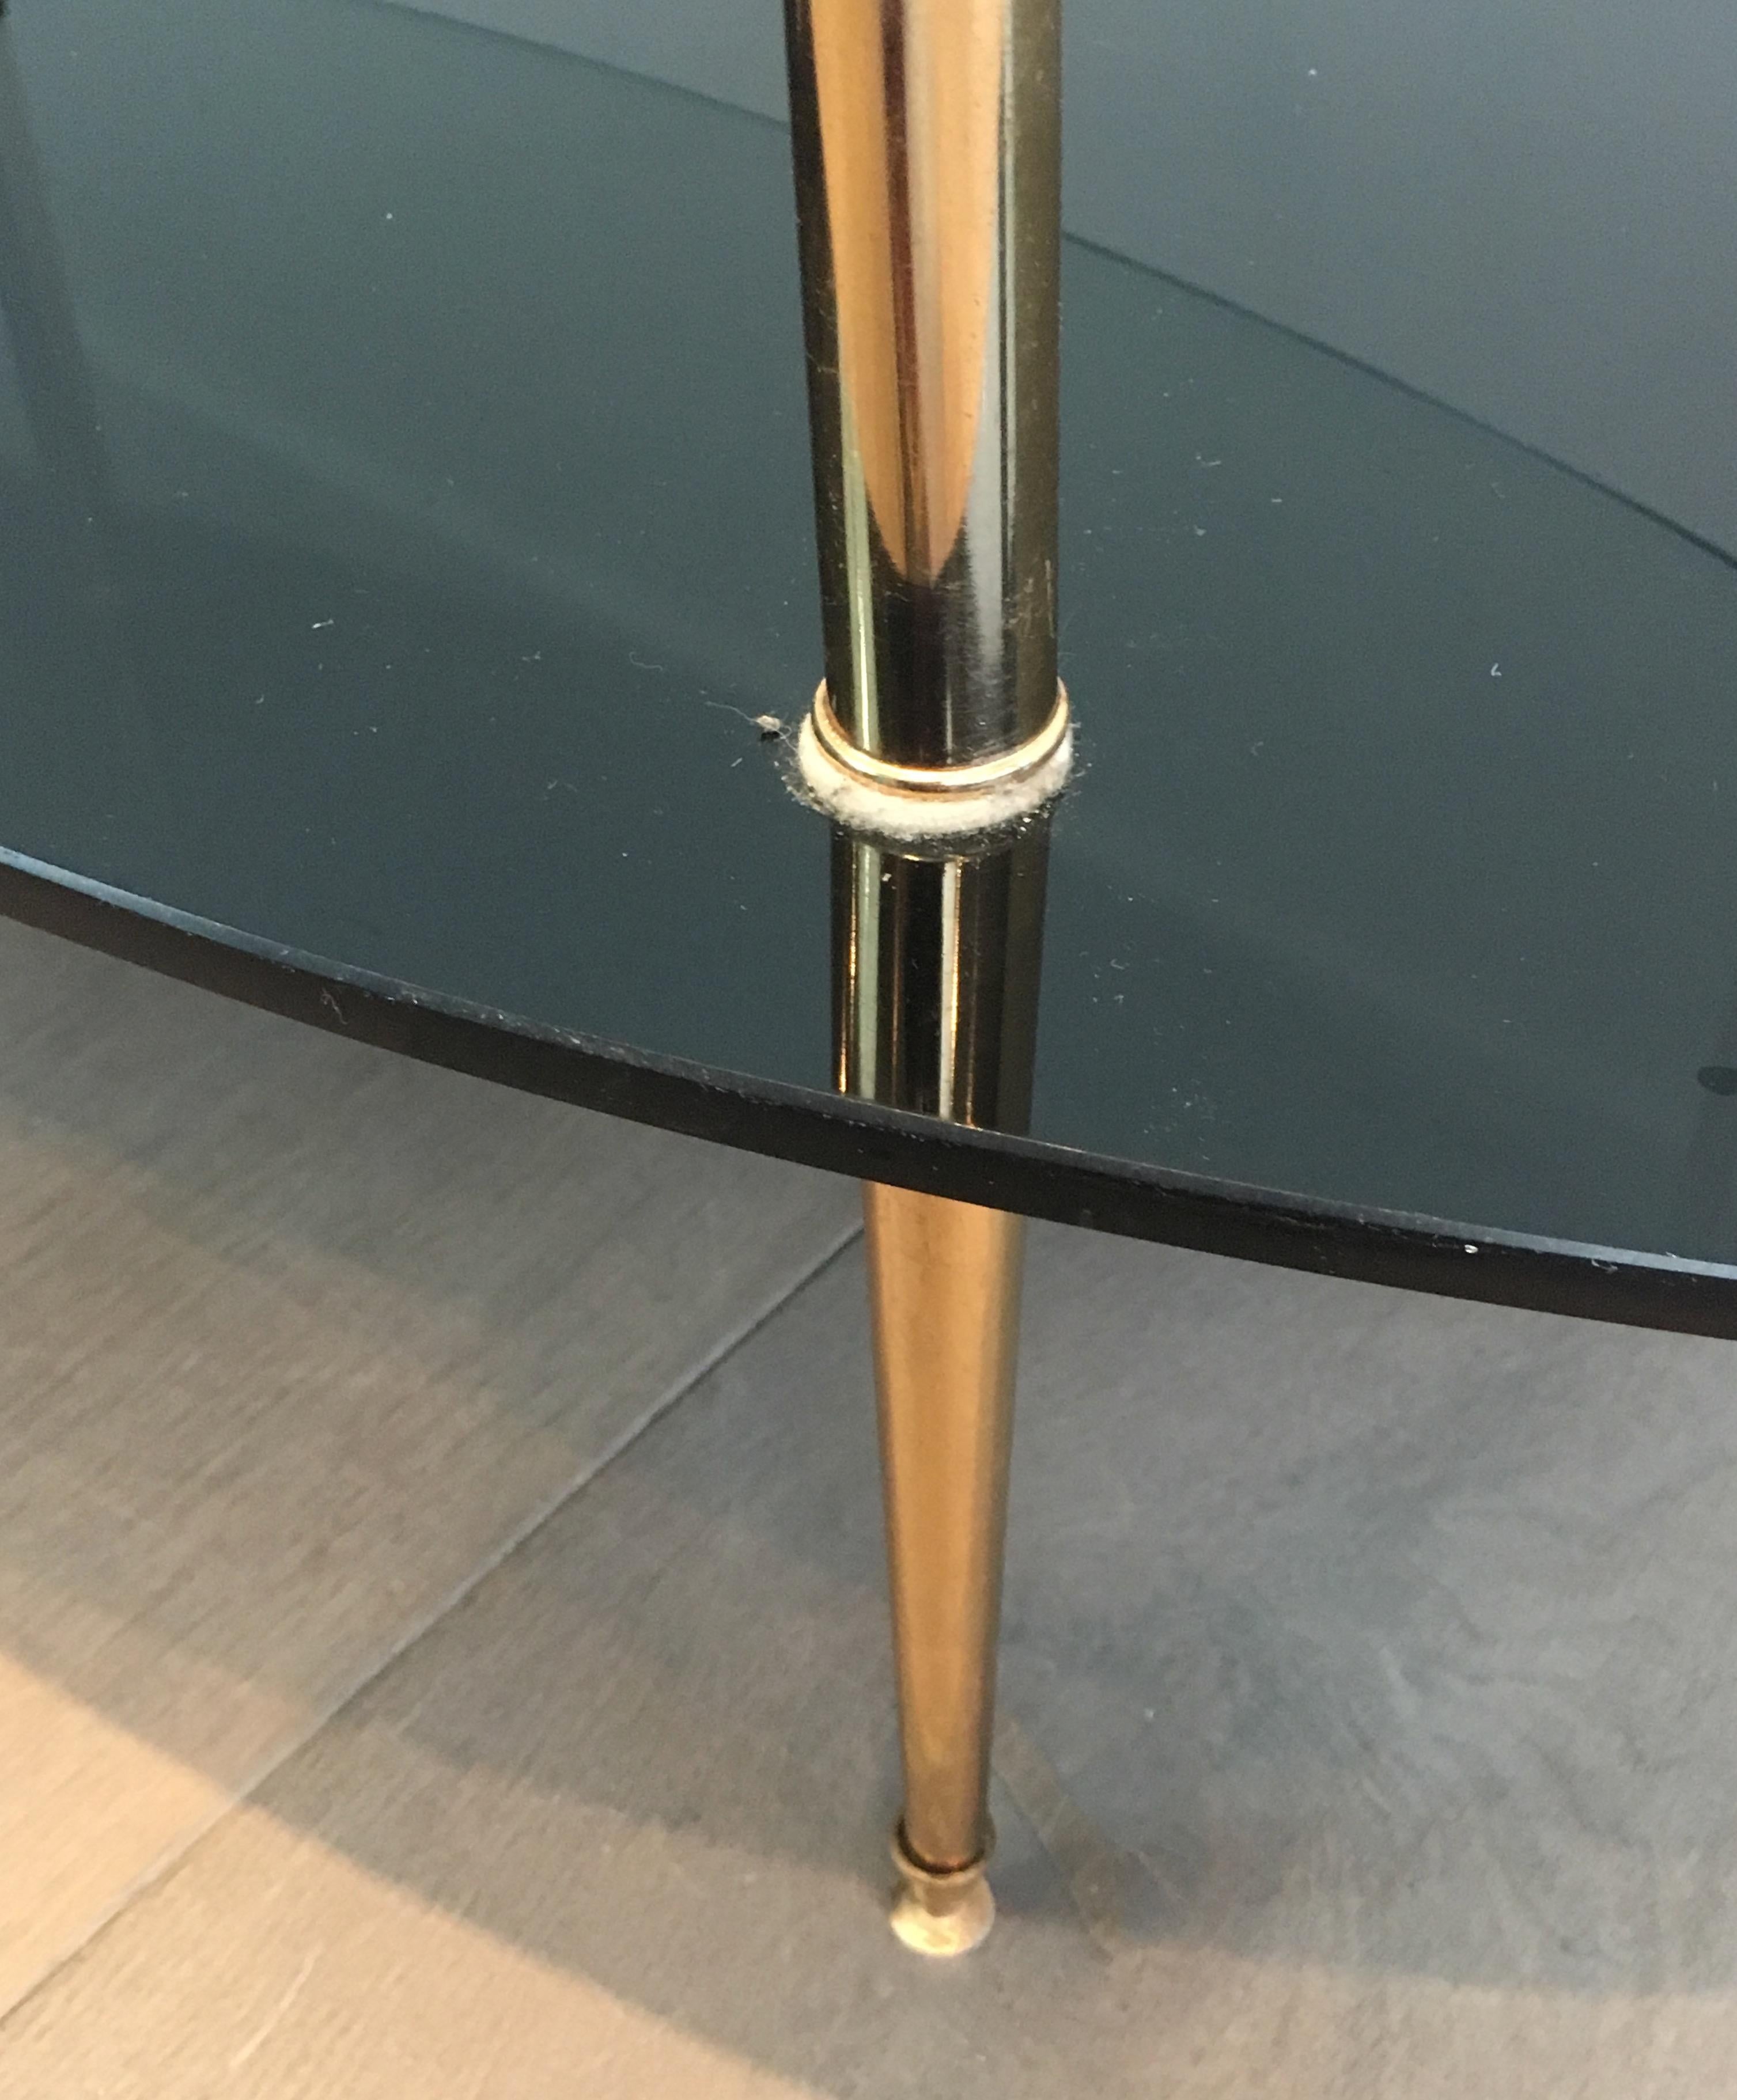 Lacquered Design Coffee Table Made of Brass, Glass and Black Lacquer Glass